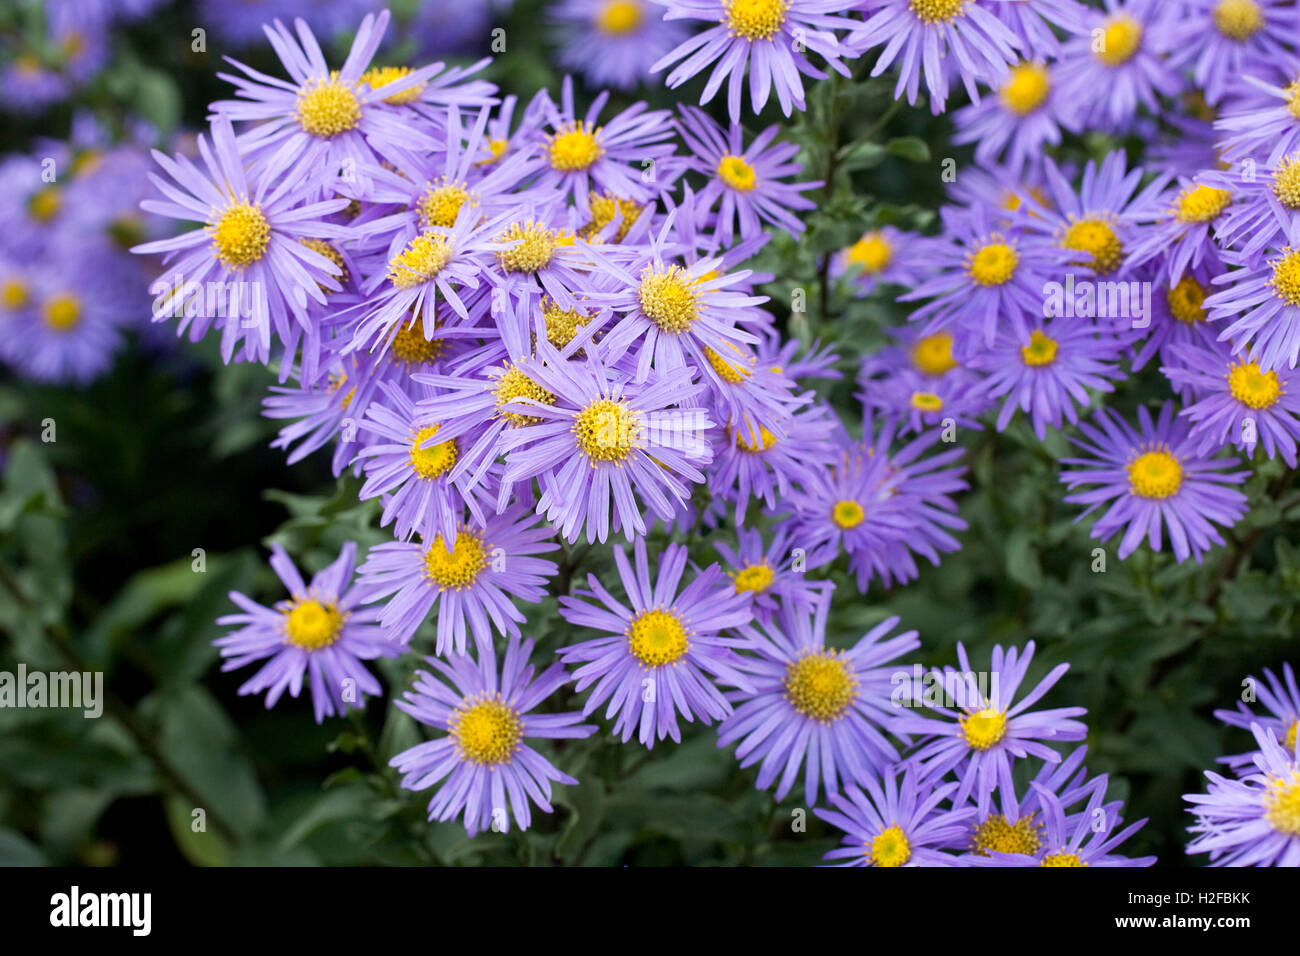 Aster amelius 'King George' Stock Photo